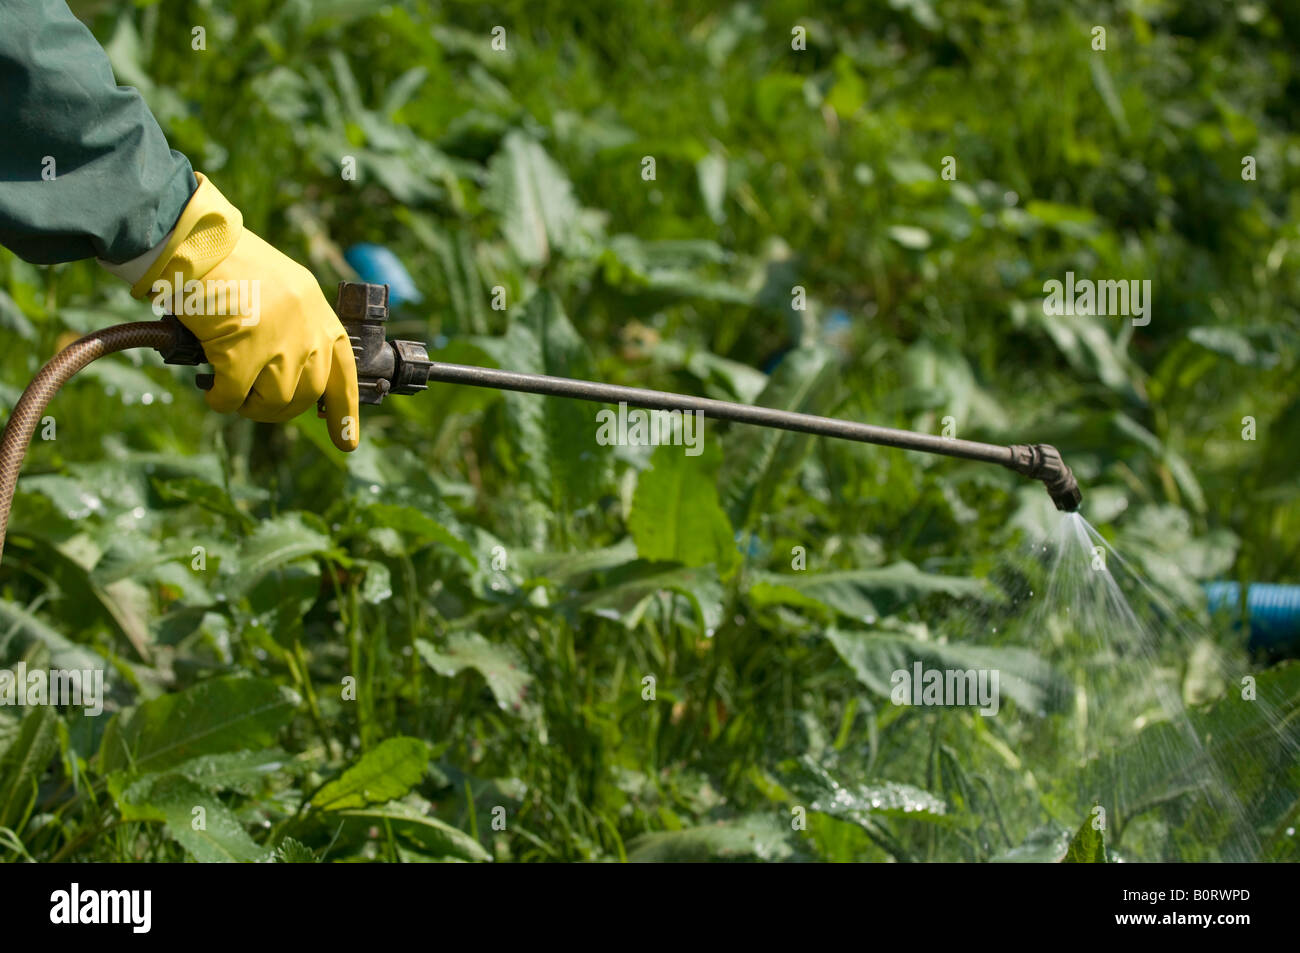 Dockings being sprayed with a herbicide using a hand held applicator Cumbria England Stock Photo